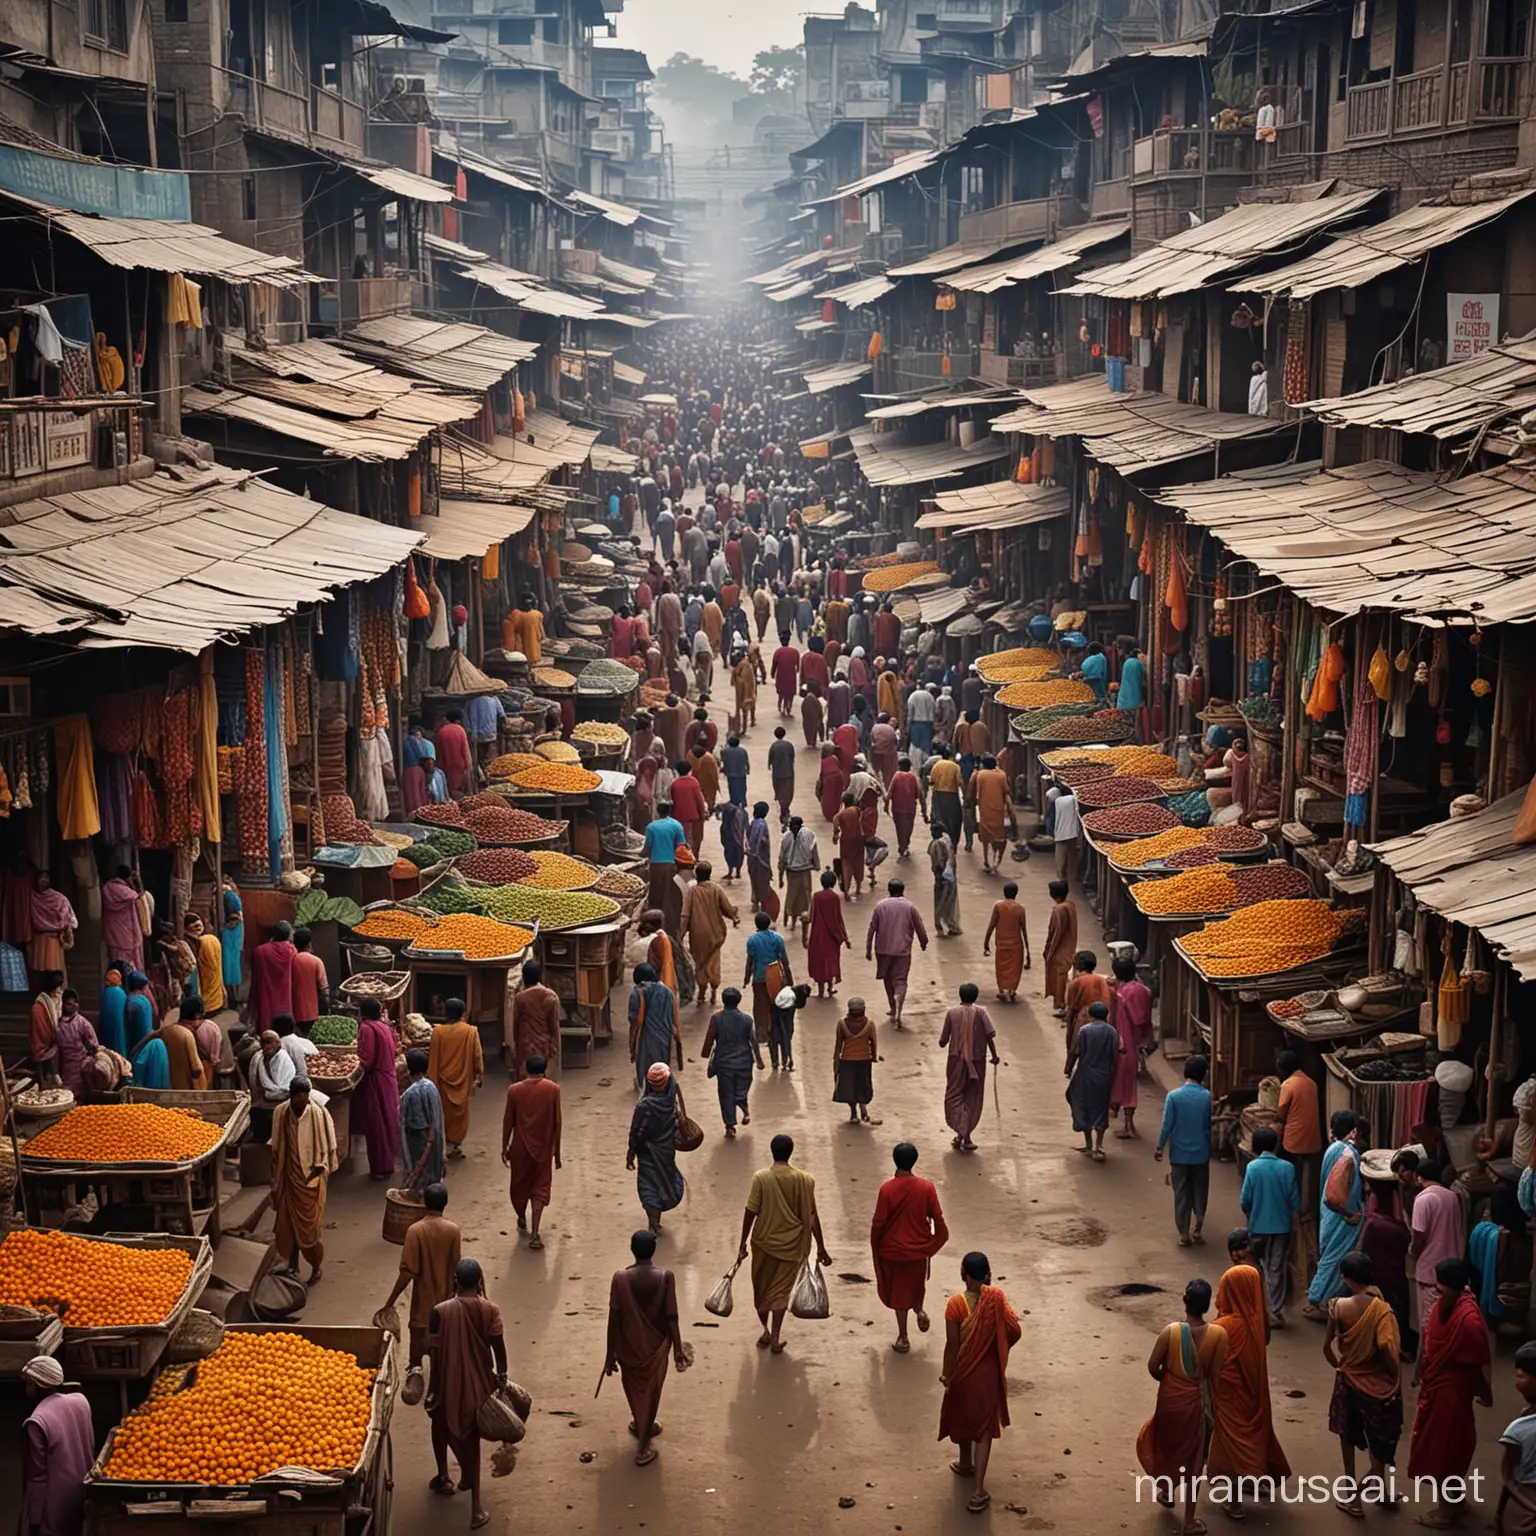 A bustling marketplace in India, captured in the vibrant and dramatic style of Steve McCurry.